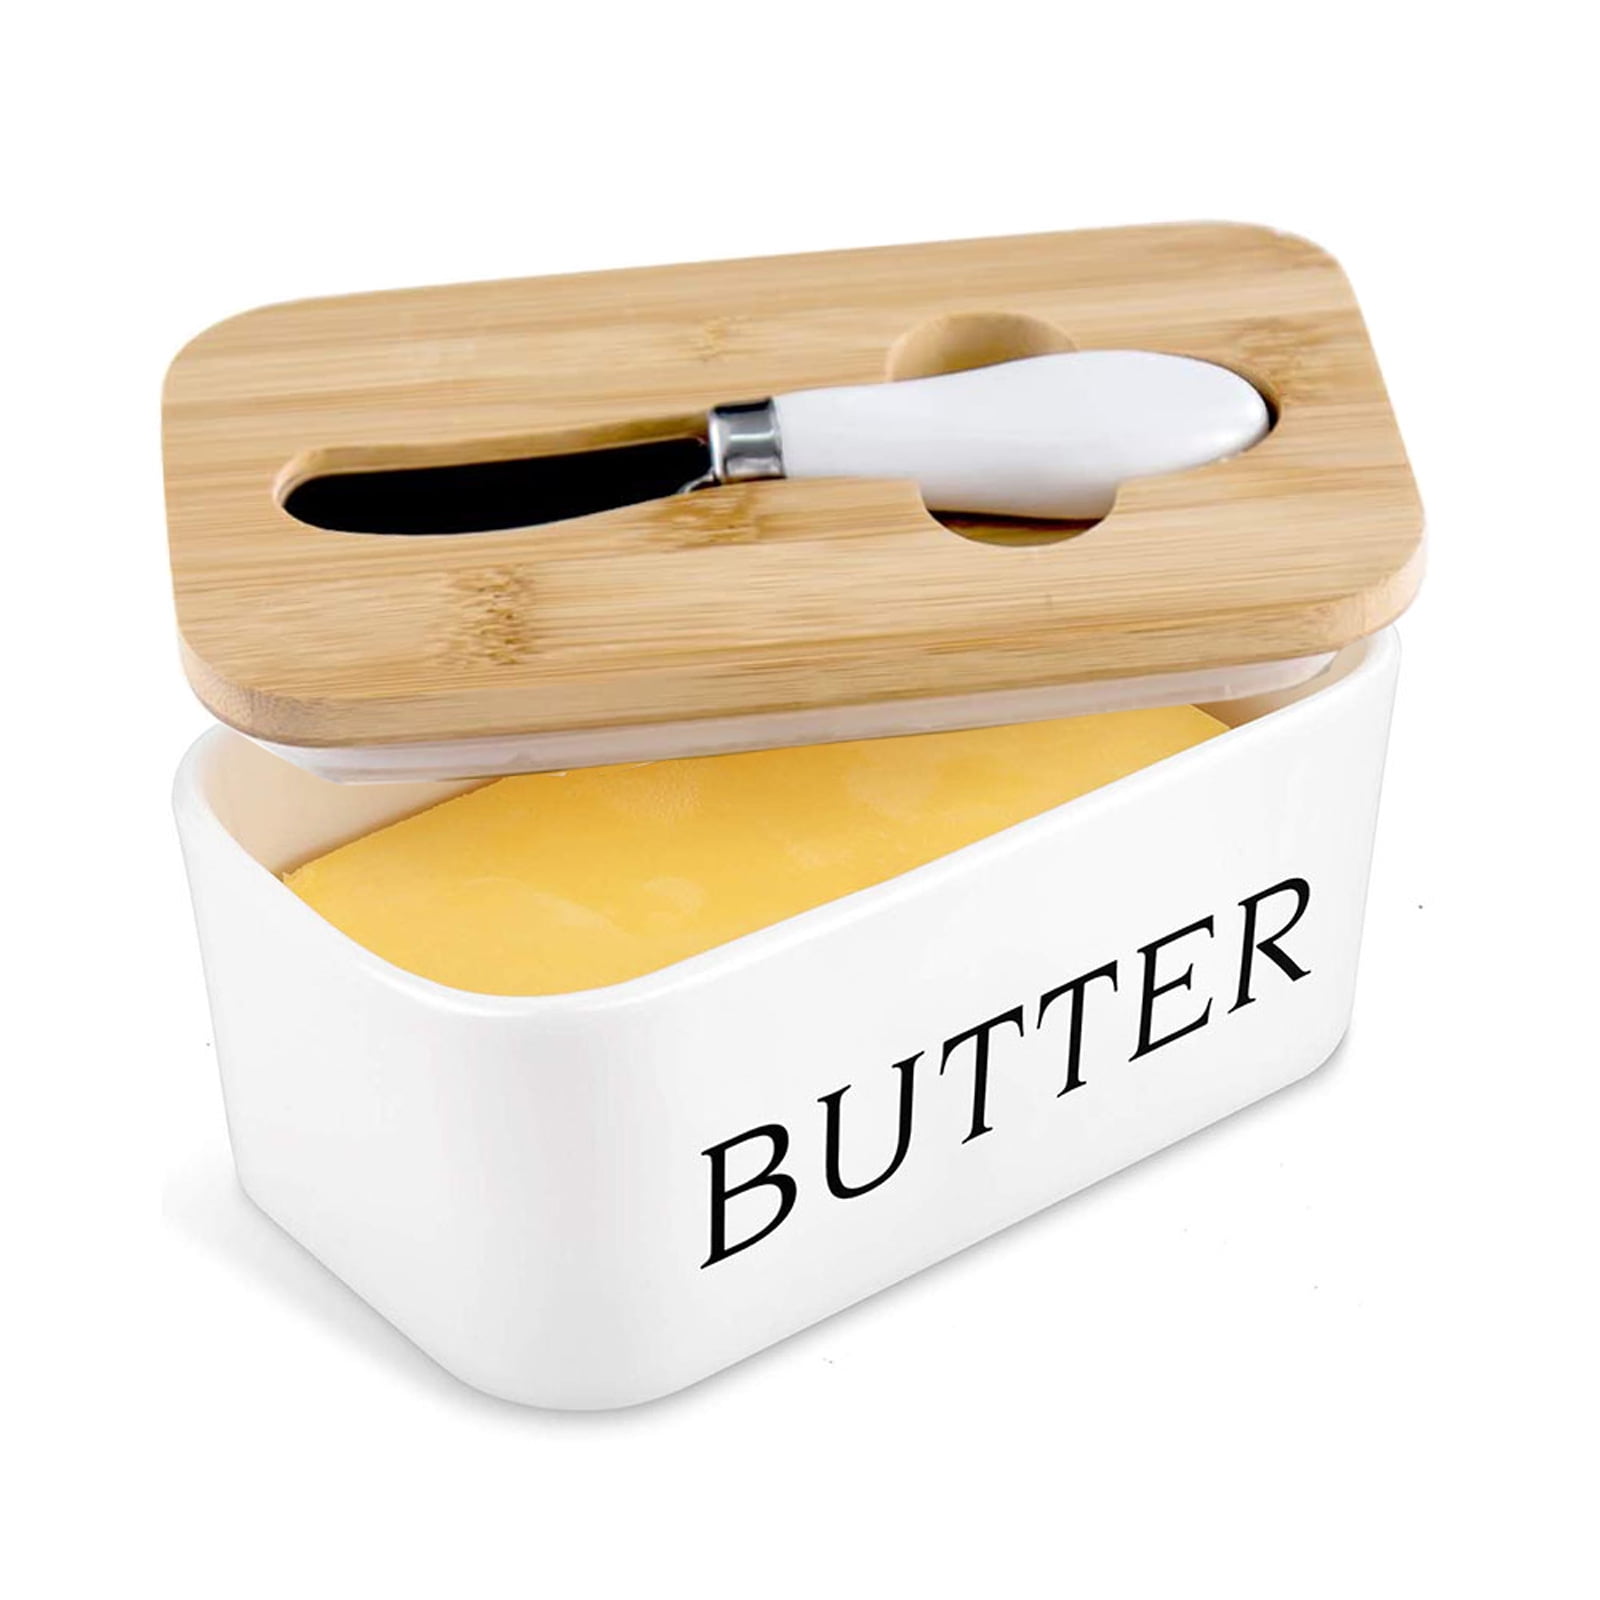 Details about   Ceramic Butter Dish Saver Keeper Case Butter Container Storage Box with Lid 